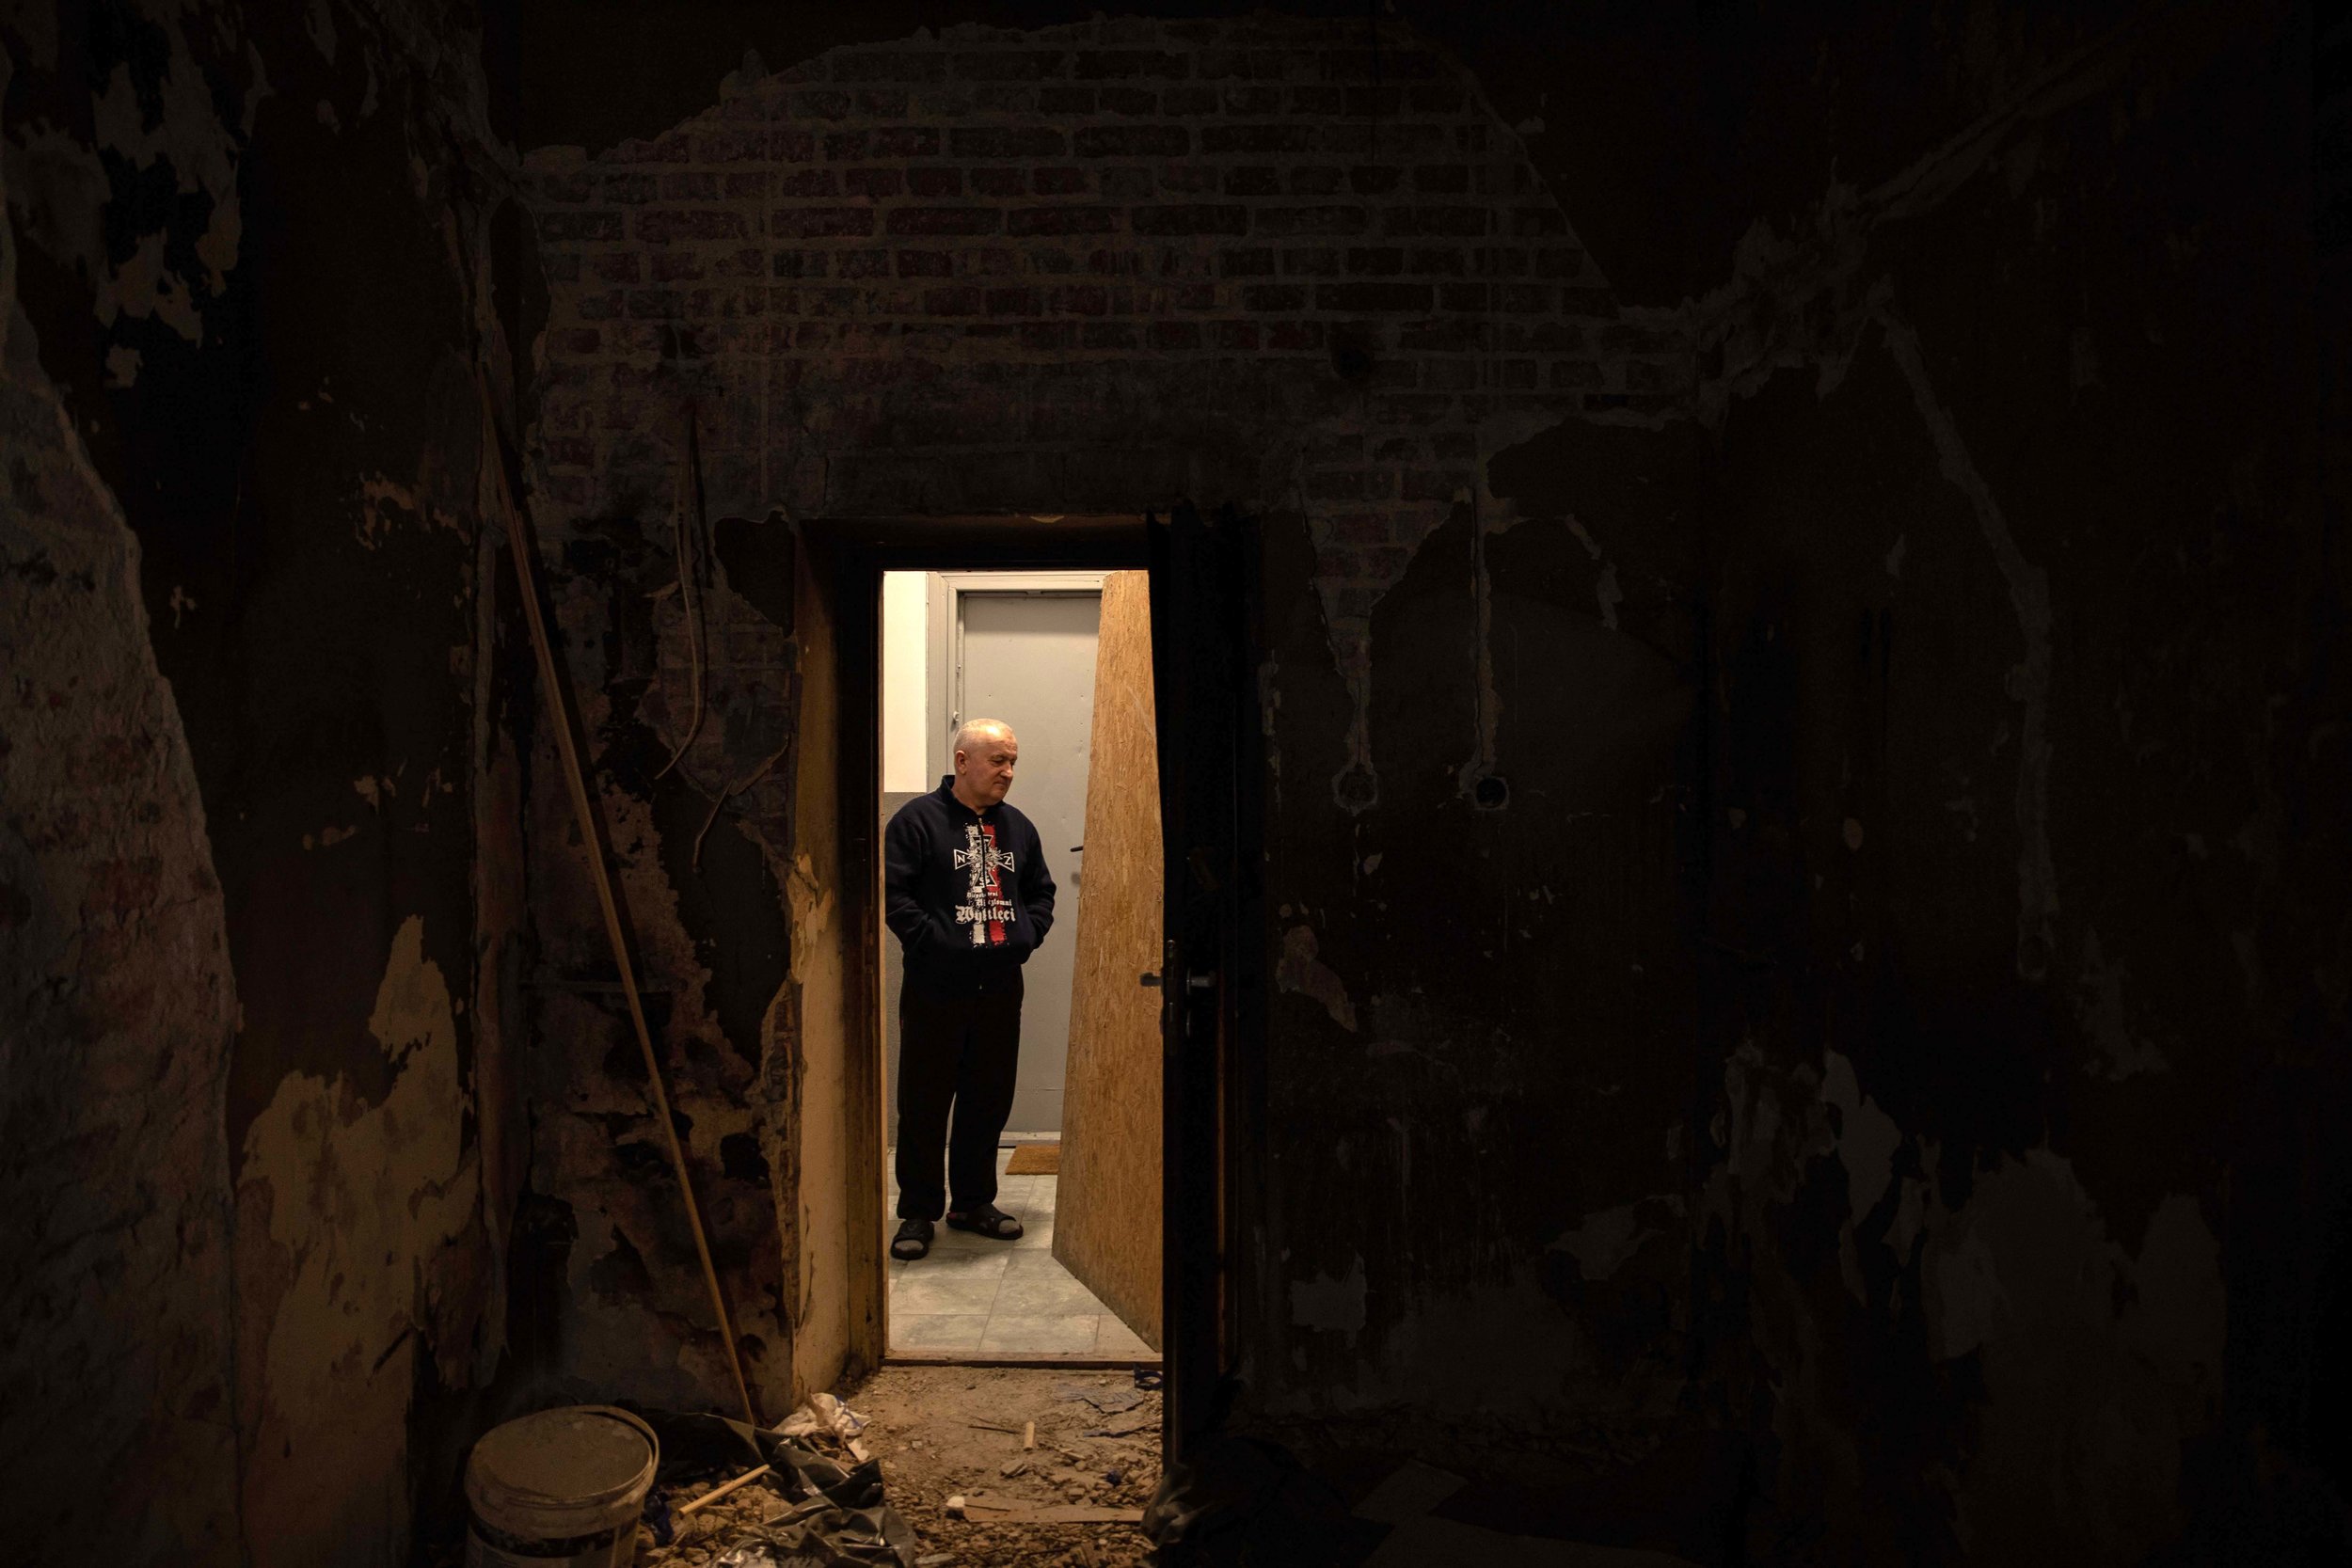 WARSAW • Stanislaw, a friend, stands in the hall of the flat Ryszard Kowalski moved into in the 1970s with his wife and her parents. Forty years on, nothing has been done to improve the building.